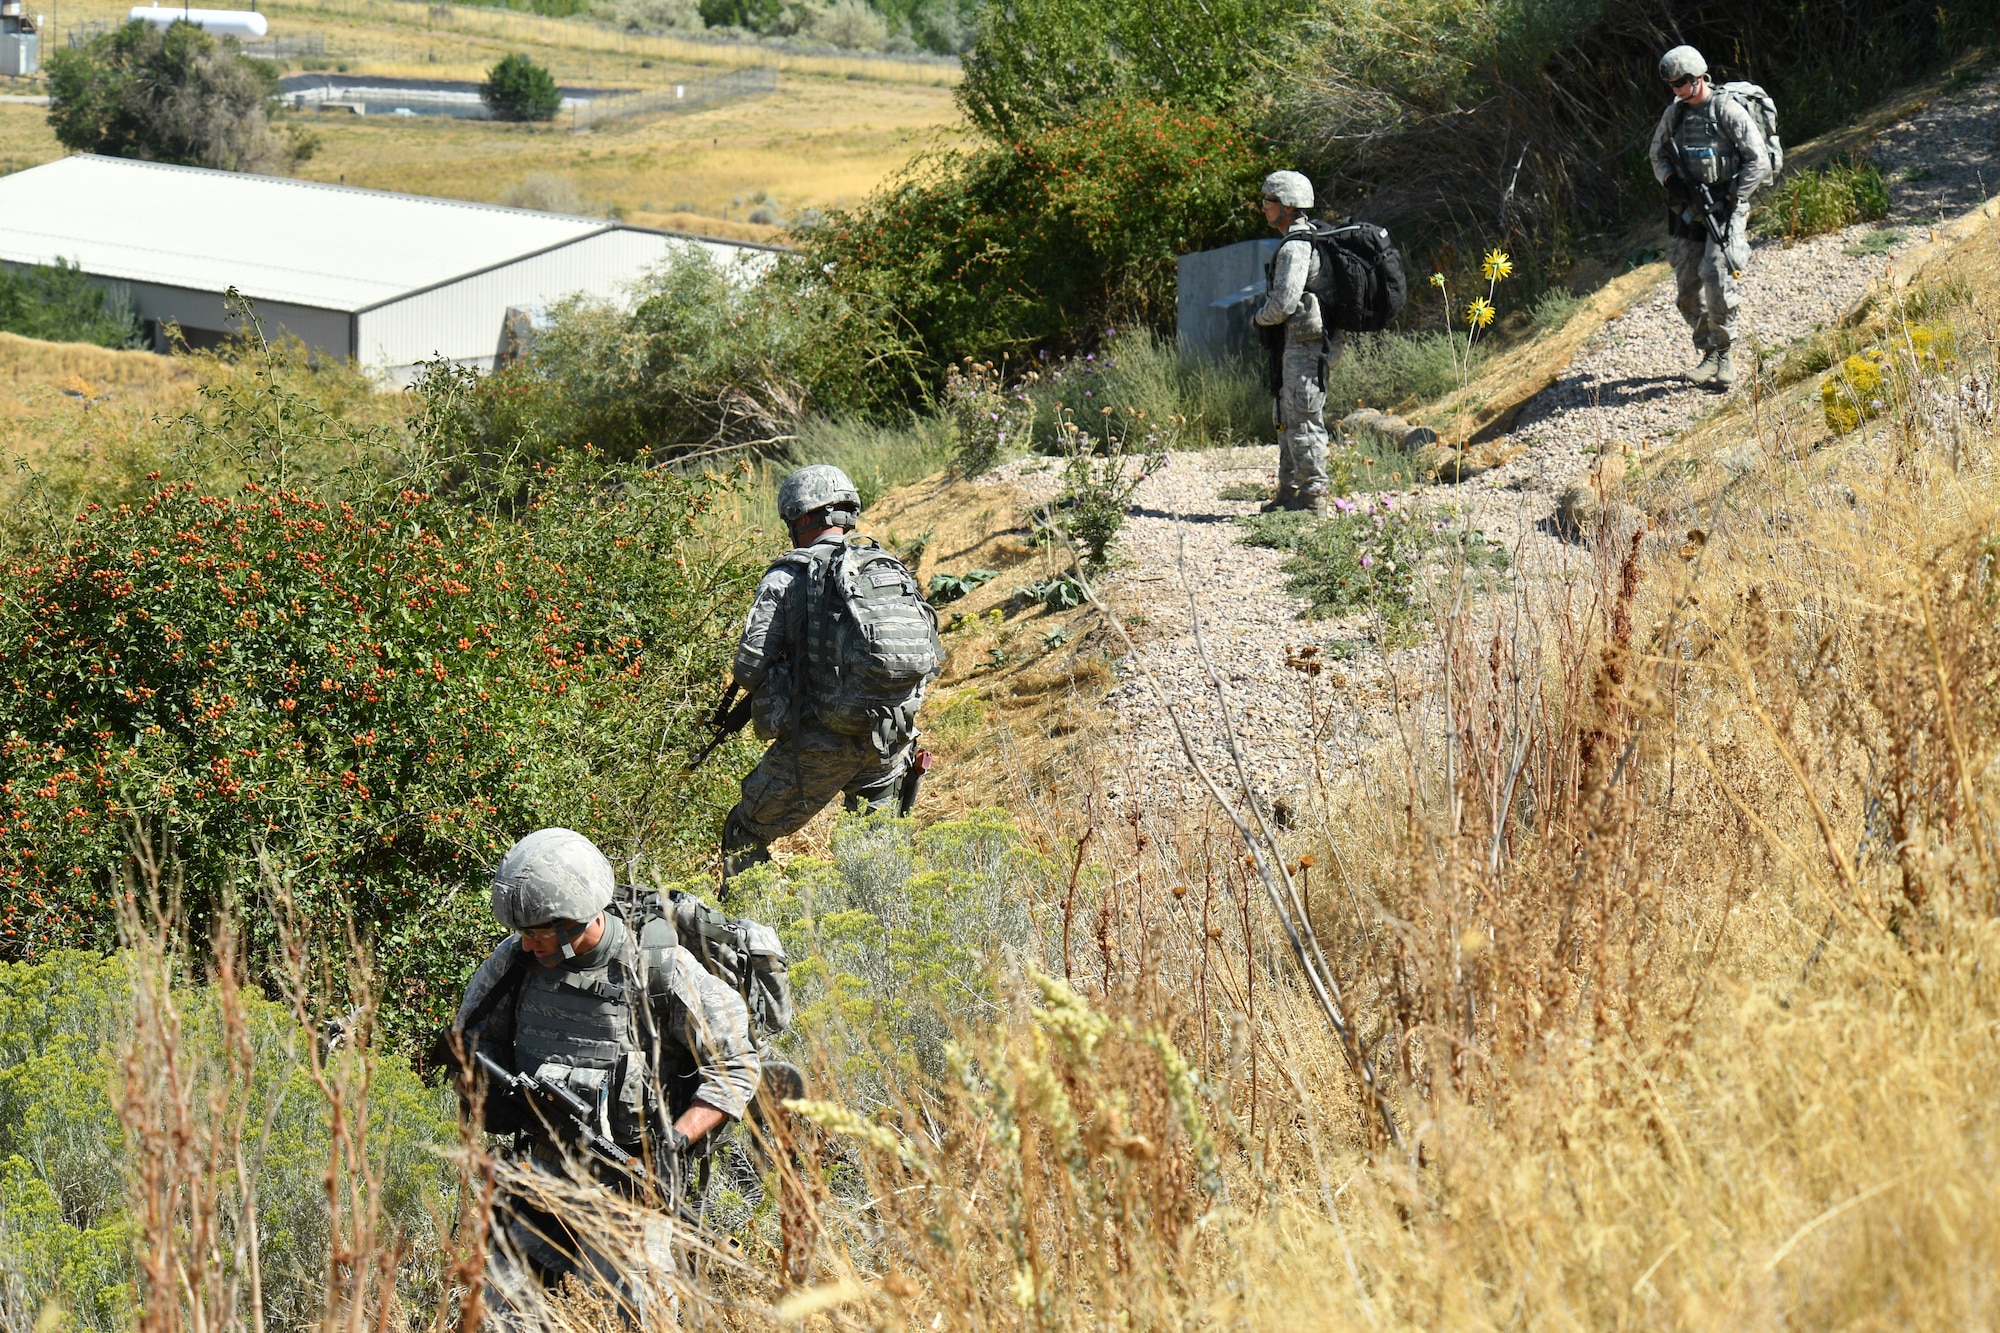 Security forces defenders during a training patrol Sept. 7, 2018, at Hill Air Force Base, Utah. A total of six Airmen were selected from across Air Force Material Command to represent the command at the 2018 Defender Challenge Sept. 10-14 at Camp Bullis Military Training Reservation, near San Antonio, Texas. The team will compete against 13 other teams from other U.S. Air Force major commands, Great Britain and Germany in the first 2018 Defender Challenge since 2004. (U.S. Air Force photo by R. Nial Bradshaw)